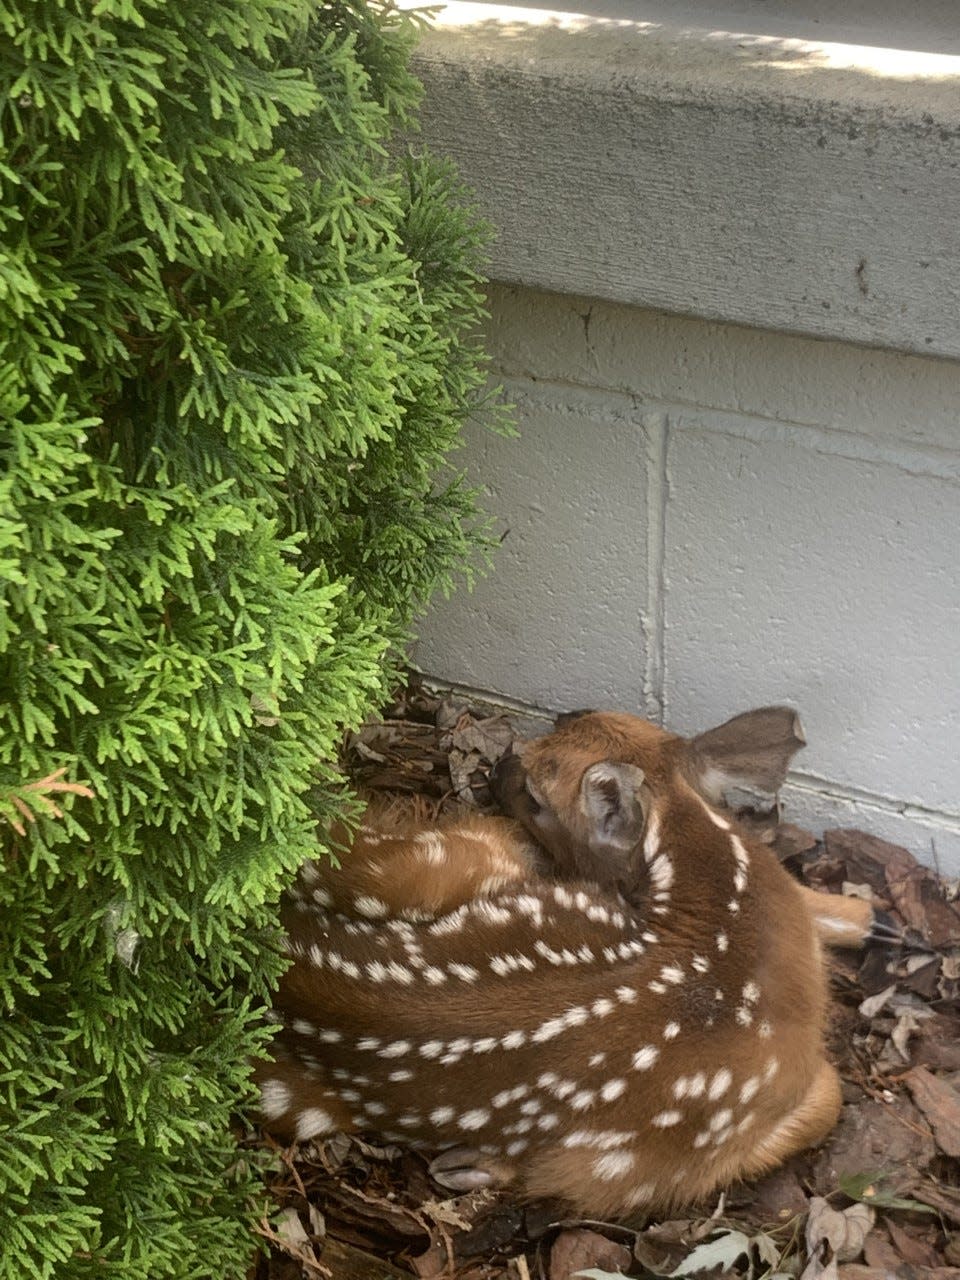 This fawn, which first turned up outside the home of Dispatch Metro columnist Theodore Decker on Sunday, has moved locations but remained close to the home since.